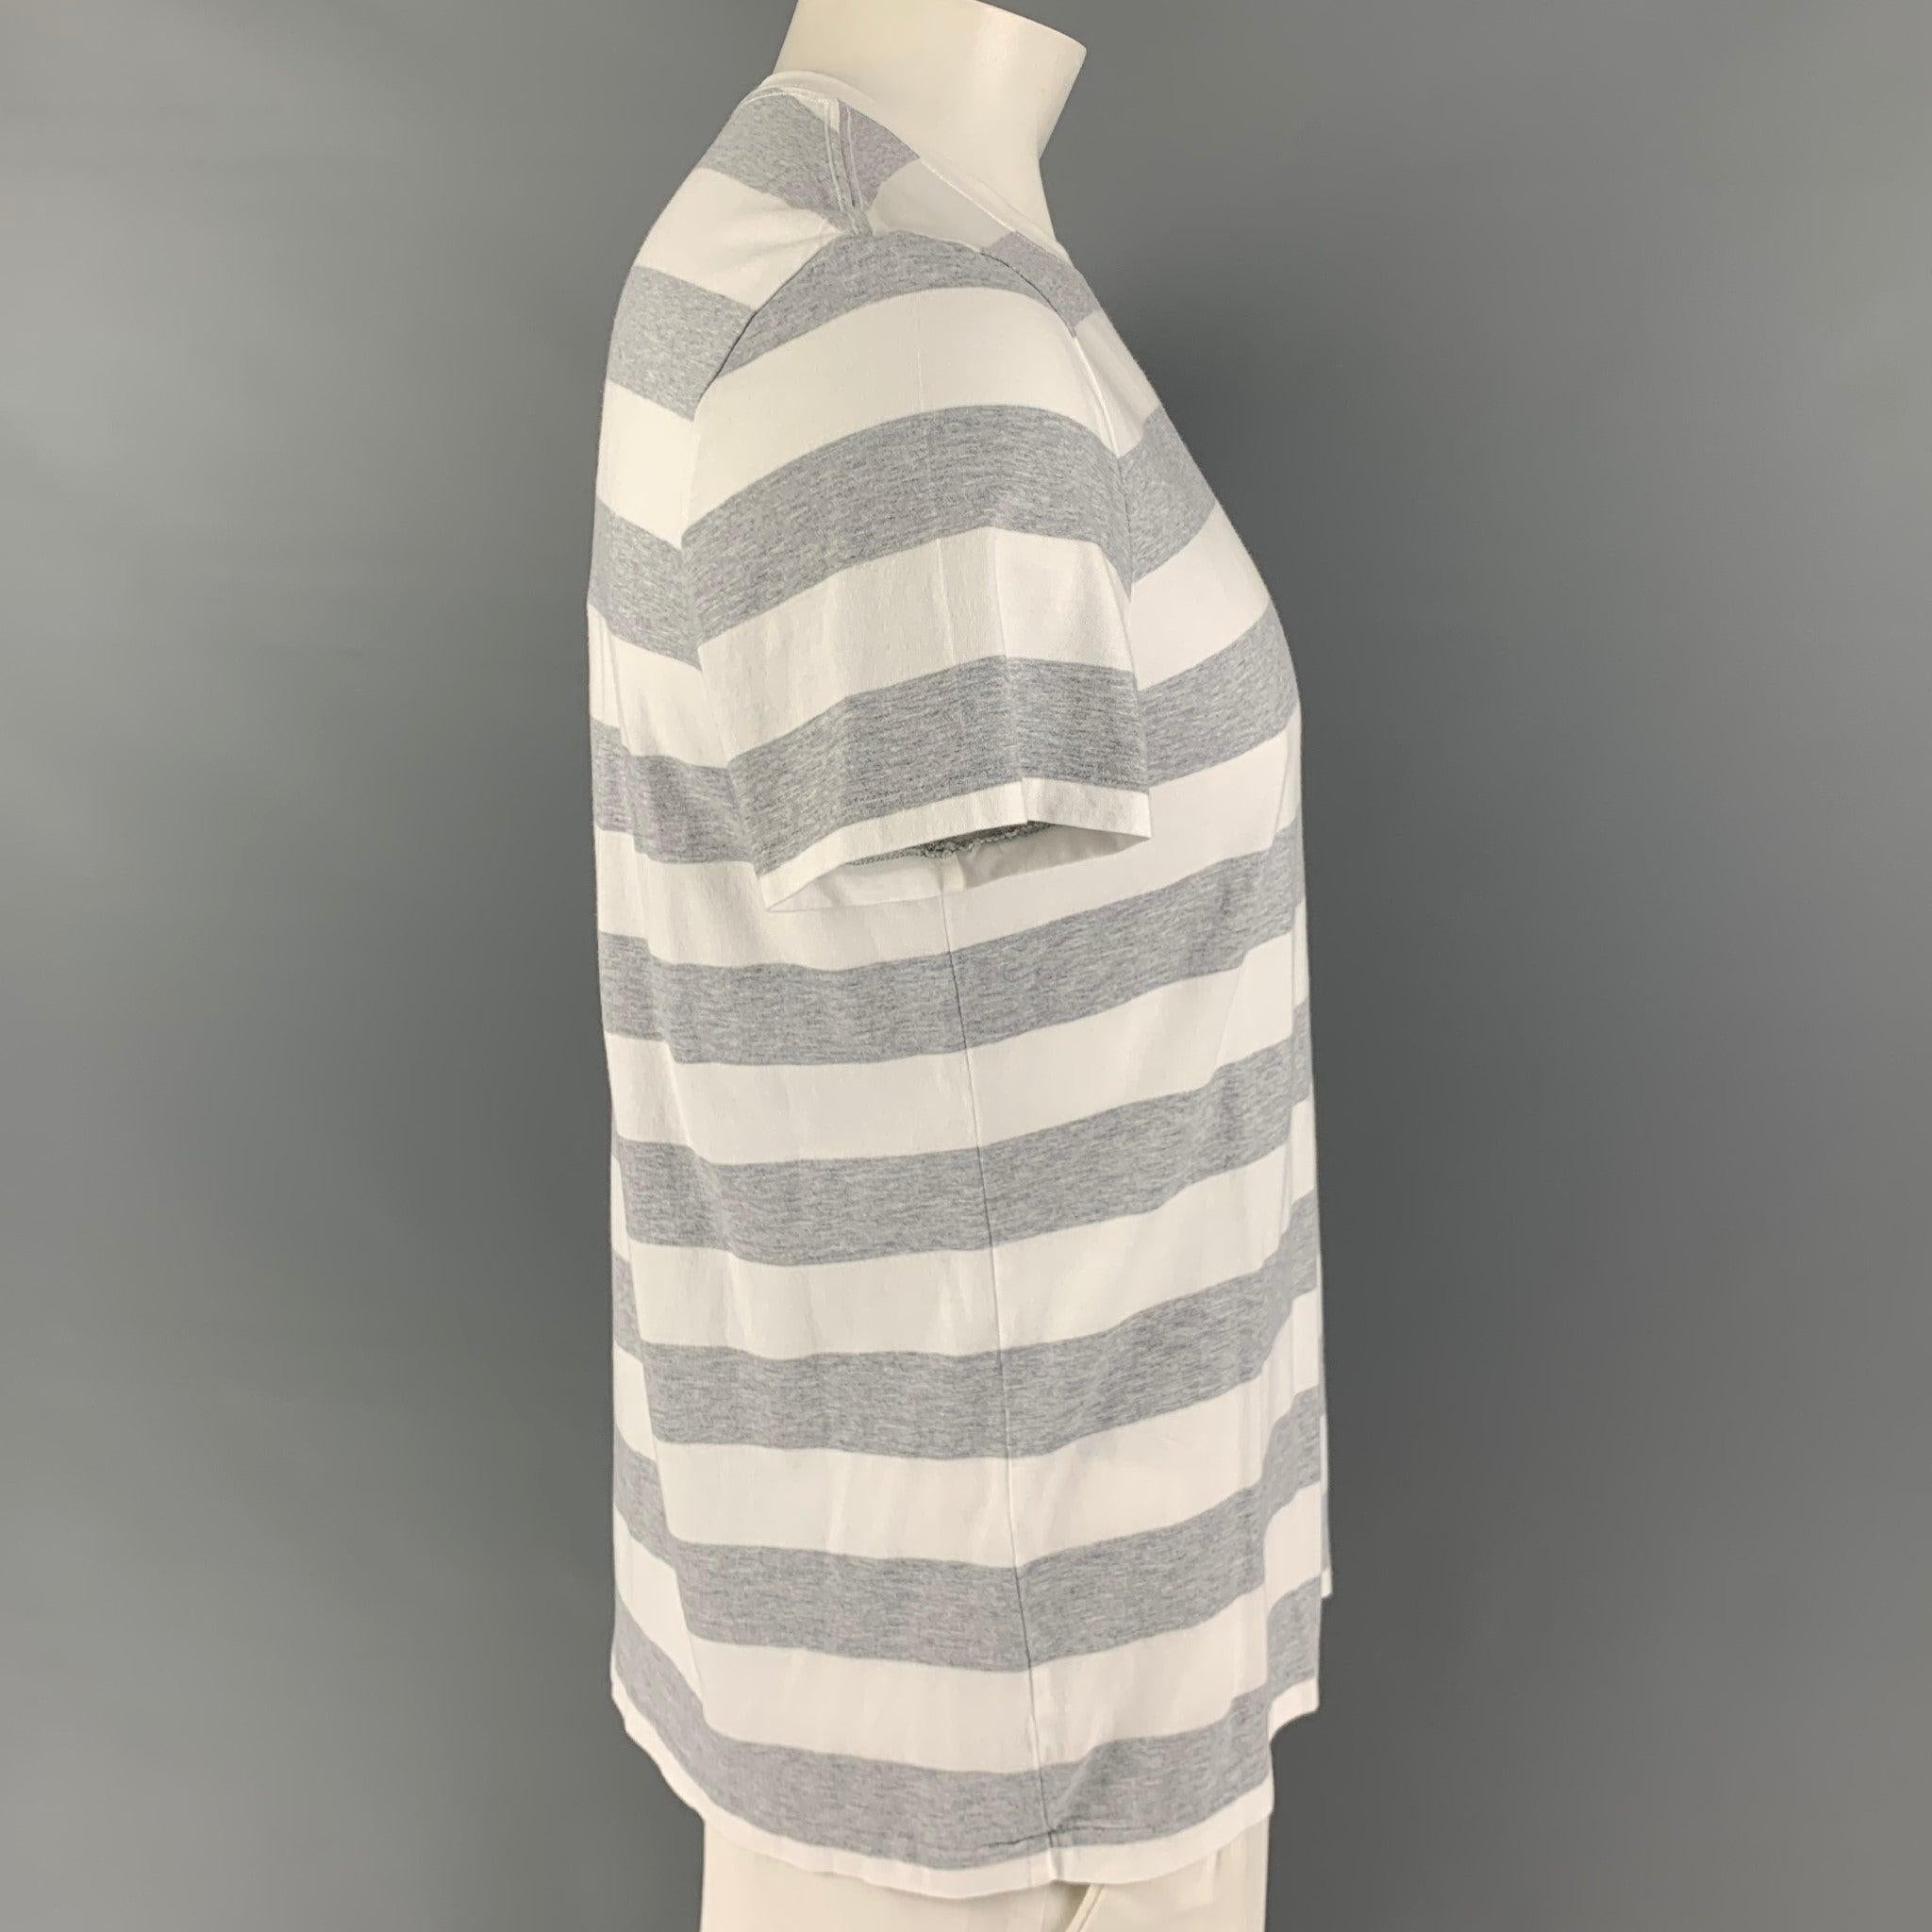 BURBERRY BRIT t-shirt comes in a white & grey stripe cotton featuring a patch pocket, embroidered logo, and a crew-neck.
Excellent
Pre-Owned Condition. 

Marked:   L  

Measurements: 
 
Shoulder: 17.5 inches Chest: 42 inches Sleeve: 8.5 inches